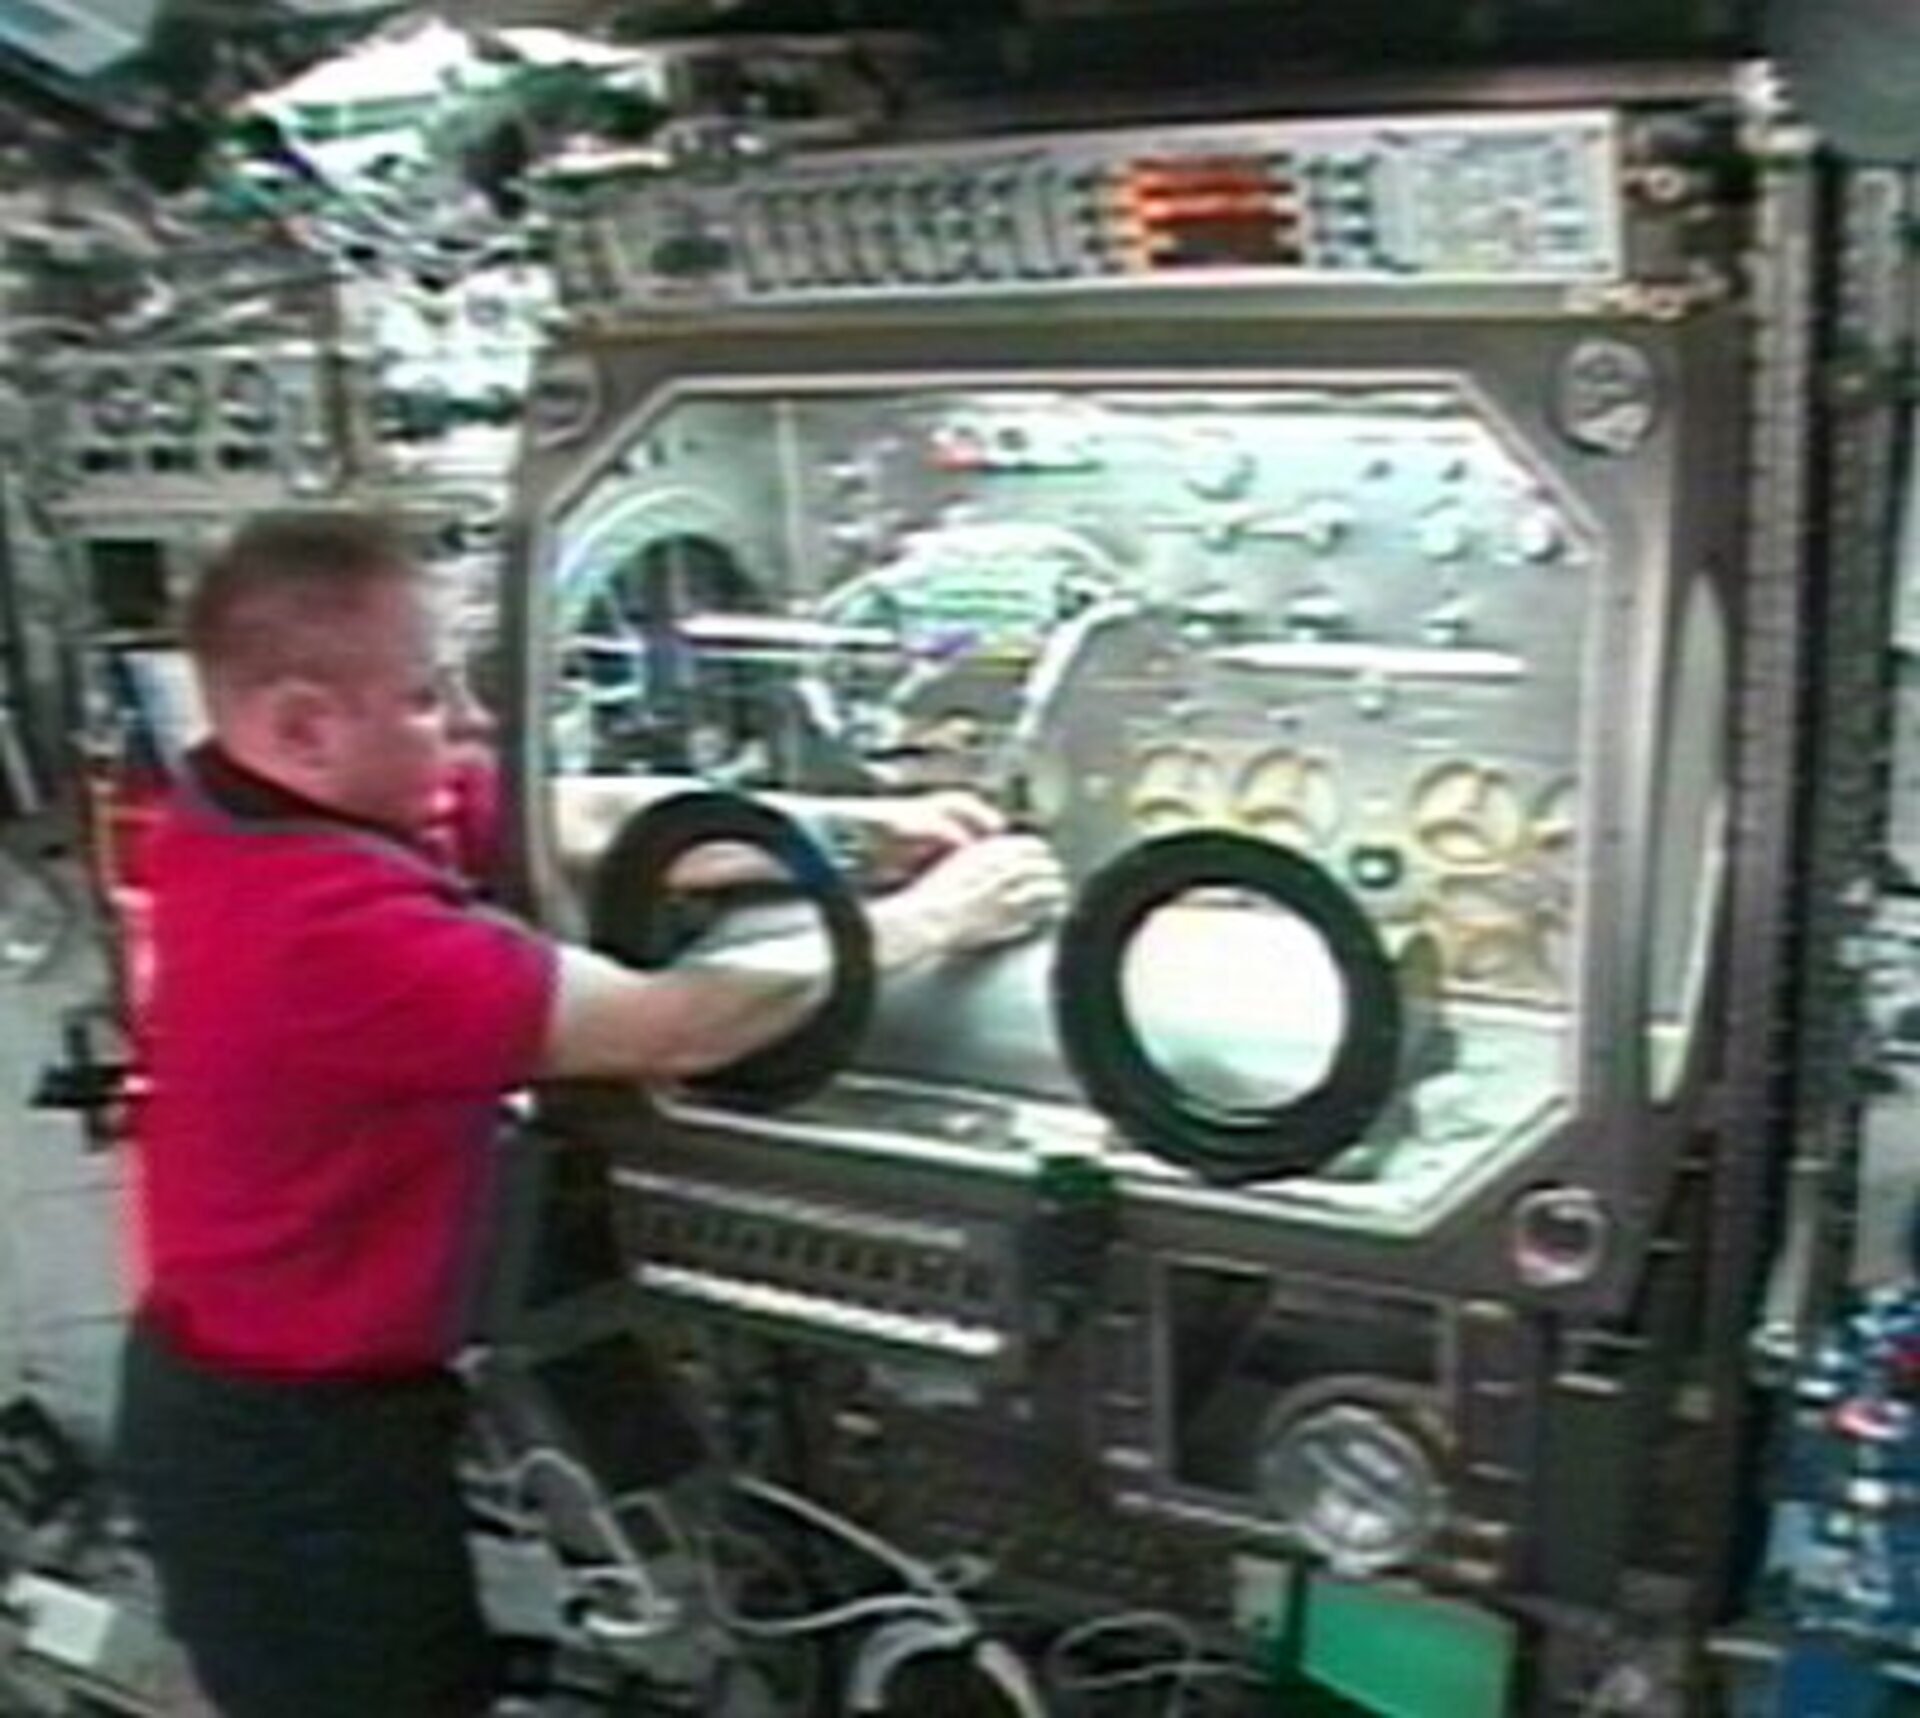 Setting up HEAT in the Microgravity Science Glovebox